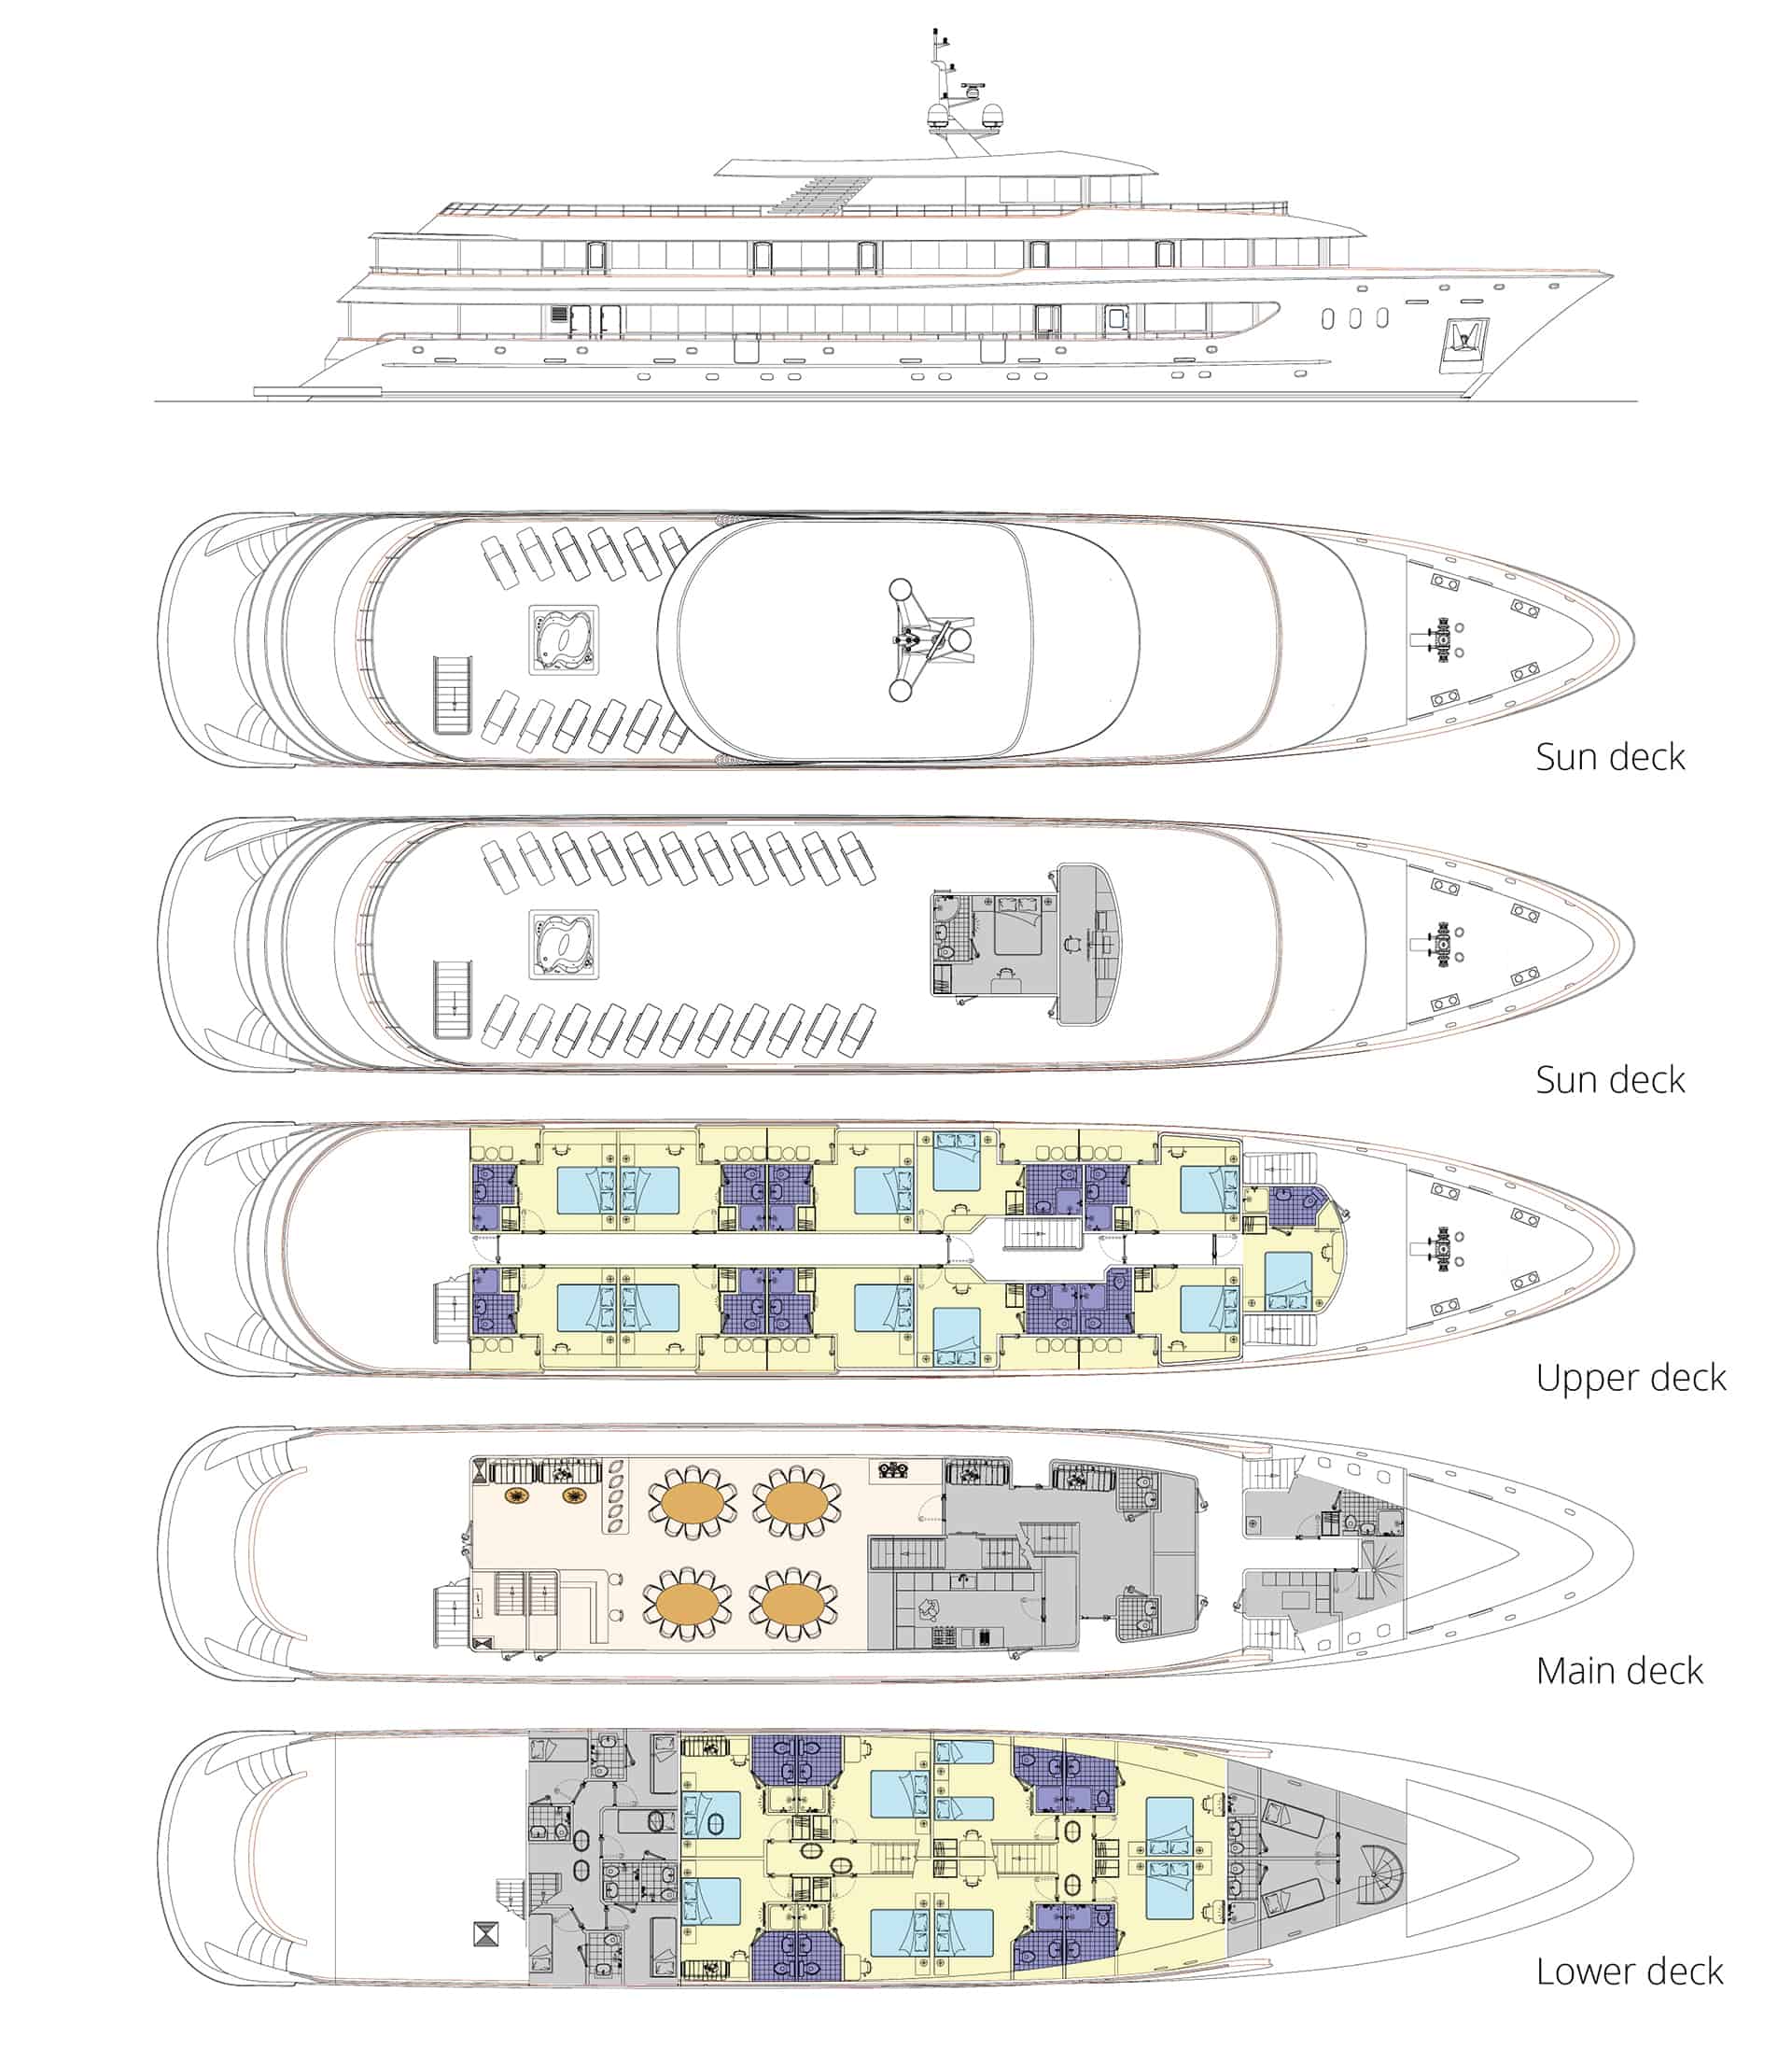 Deck plan of Rhapsody Croatia boutique yacht showing 5 decks with cabins on the Lower and Upper Decks.